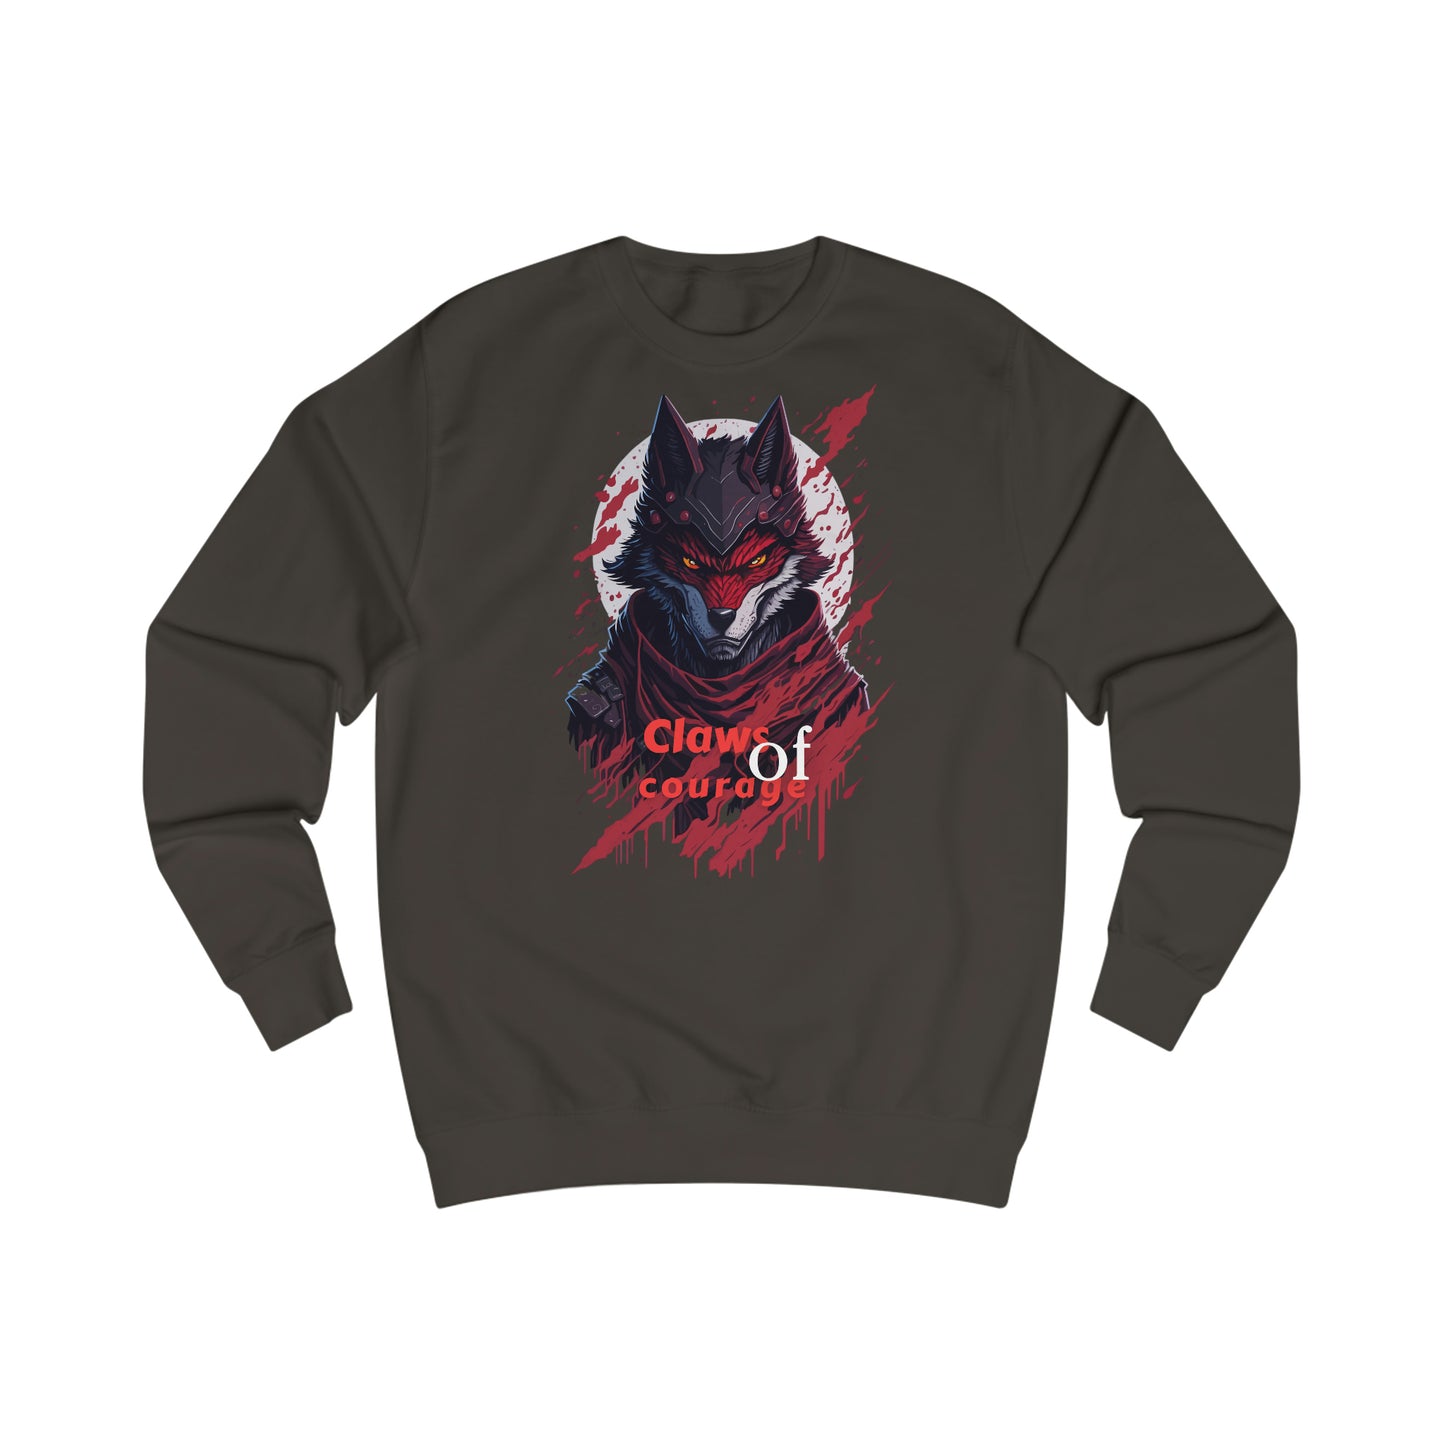 Howl with the Claws of Courage  --  Men's Sweatshirt